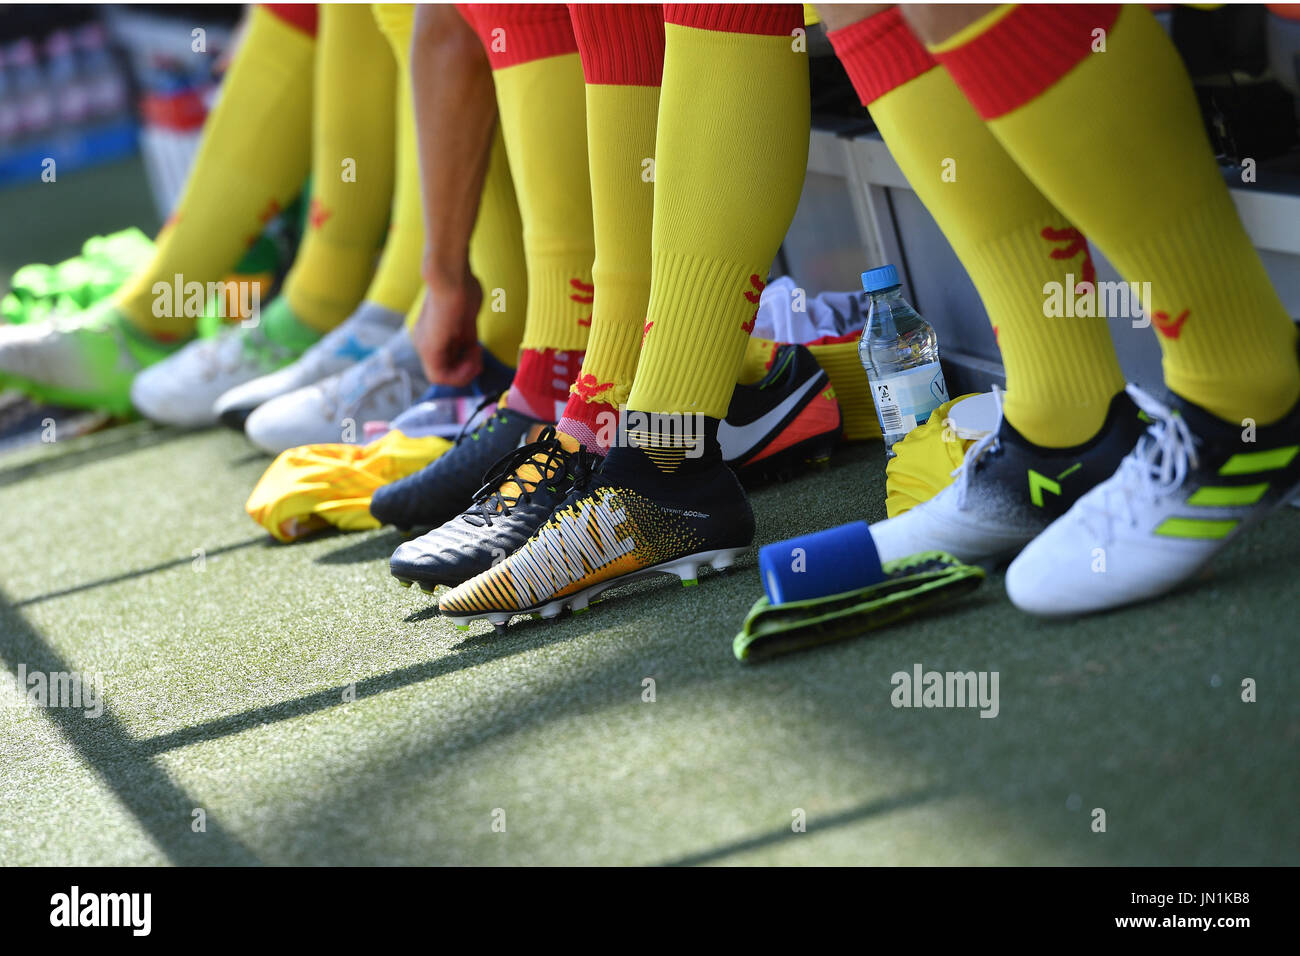 Page 9 - Adidas Berlin High Resolution Stock Photography and Images - Alamy